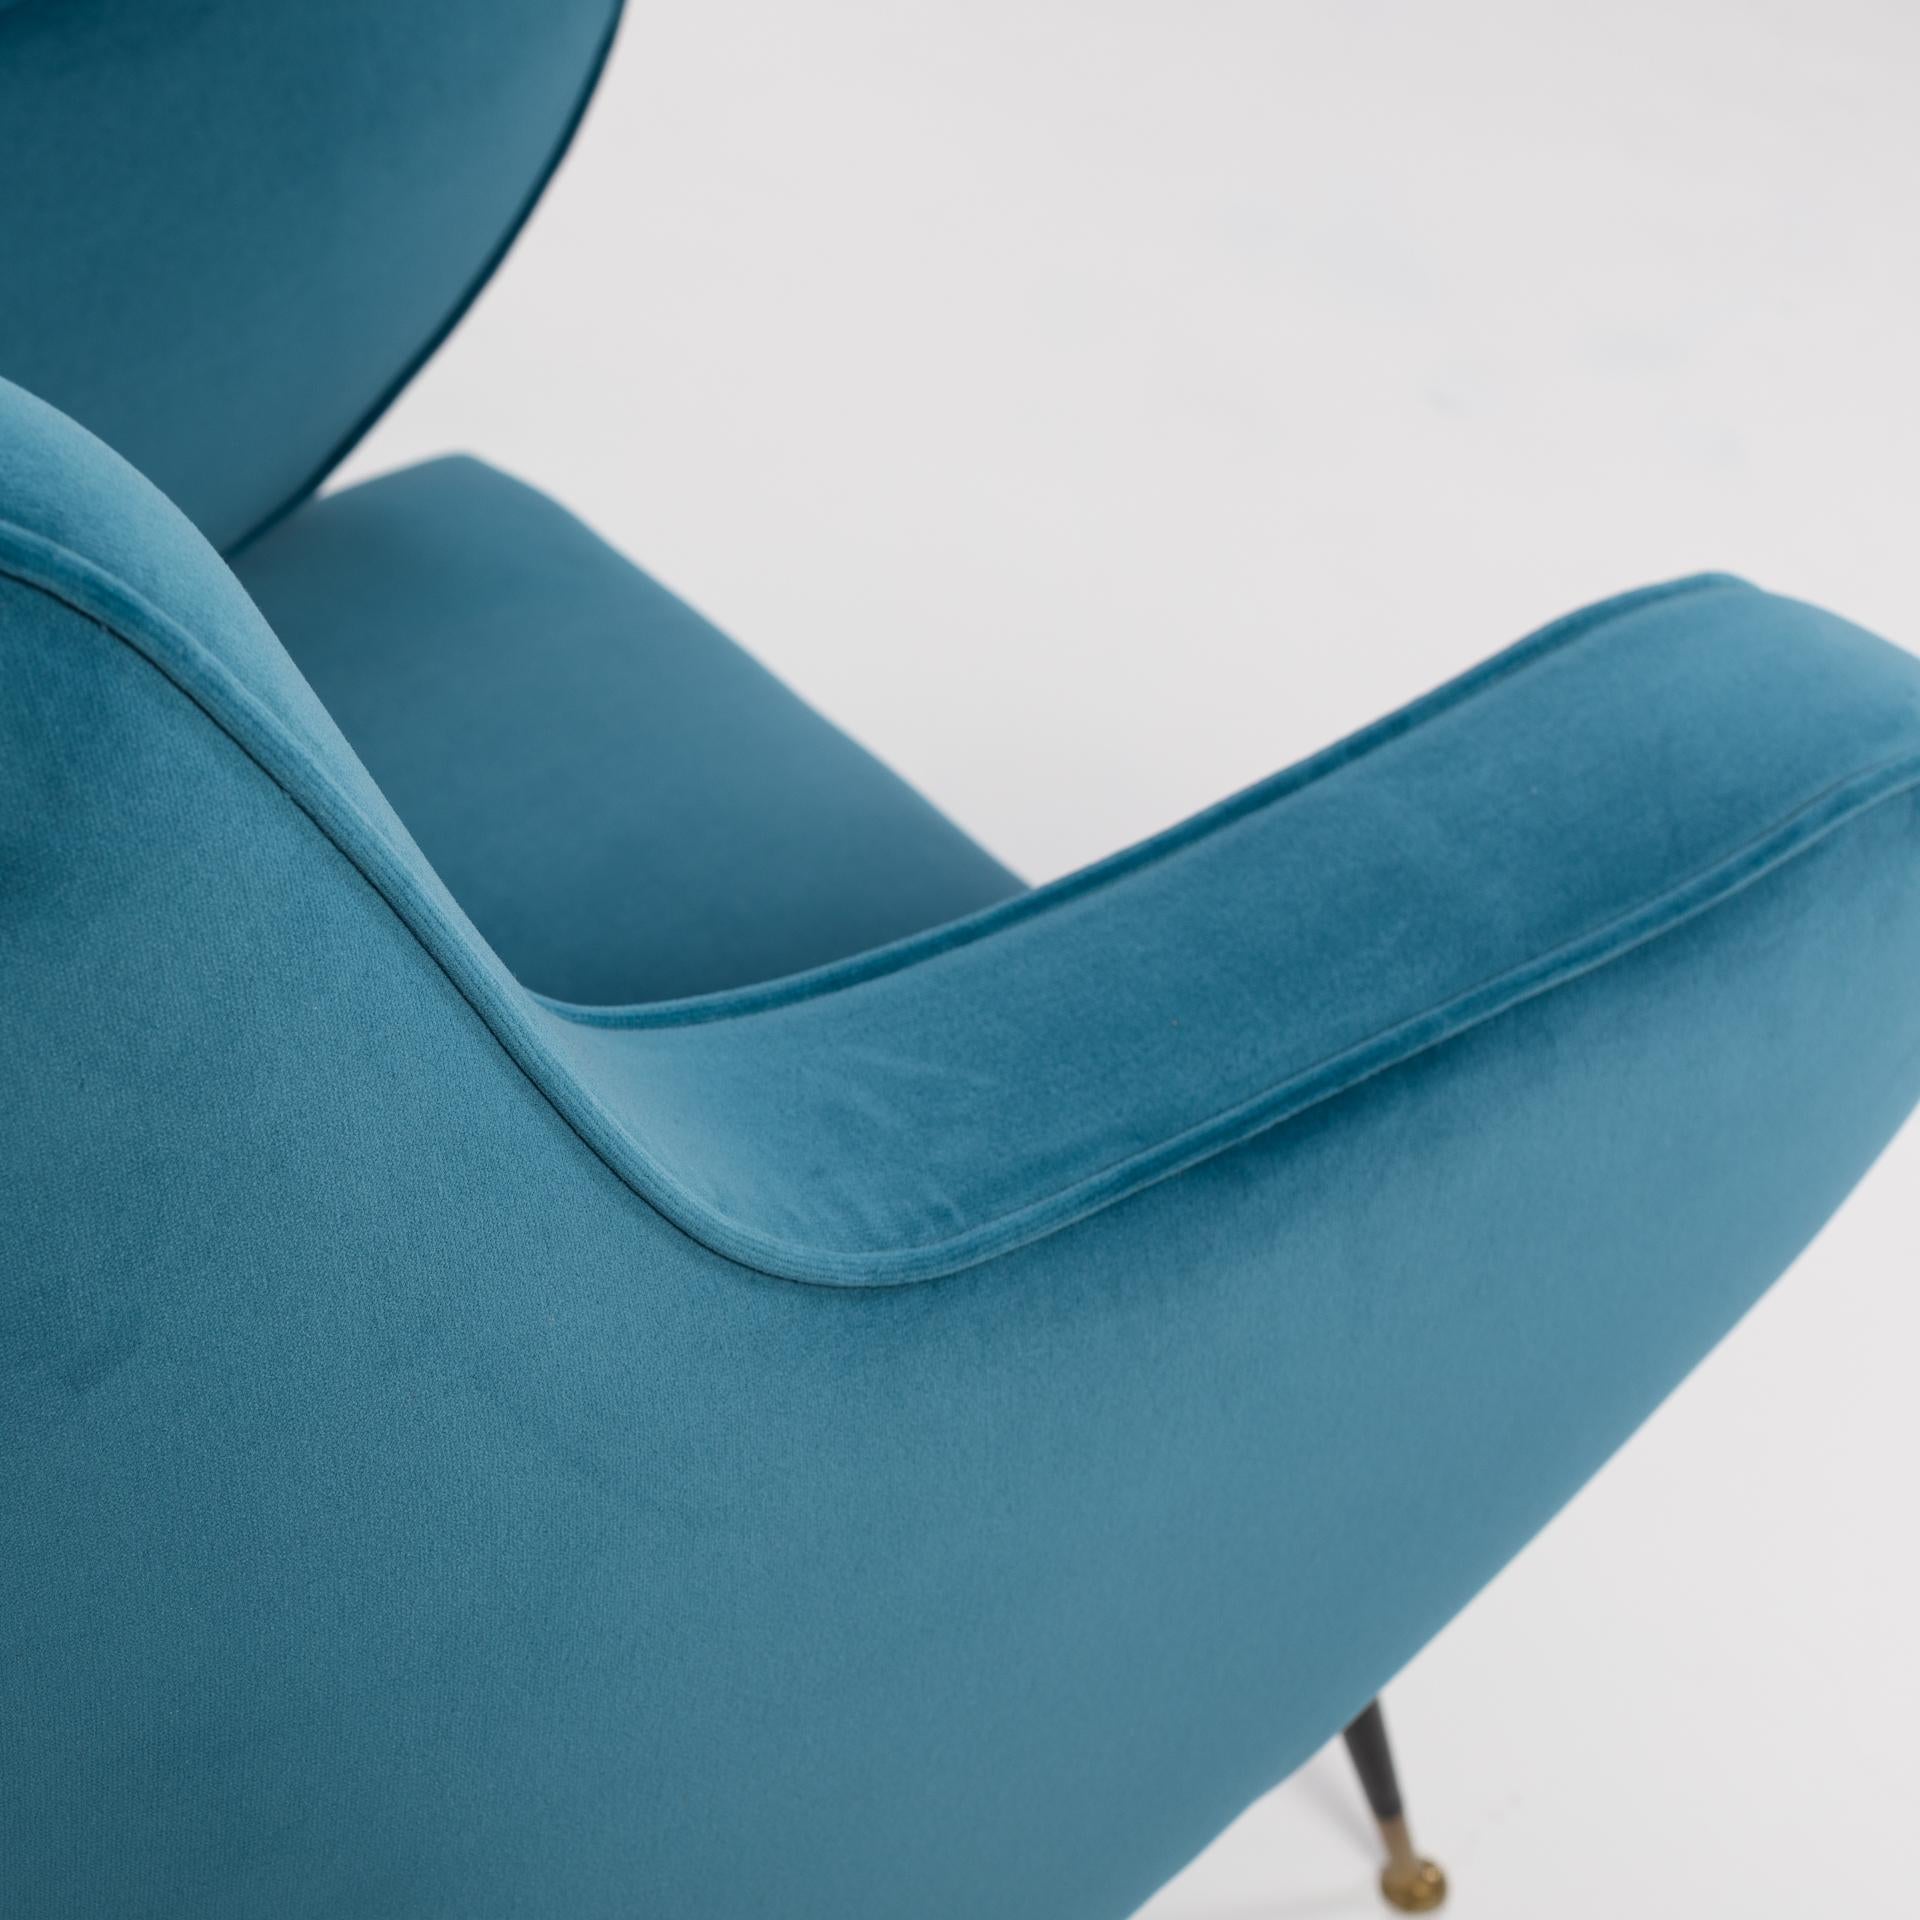 Molded Pair of Italian Midcentury Armchairs Re-Upholsterd in Turquoise Colored Velvet